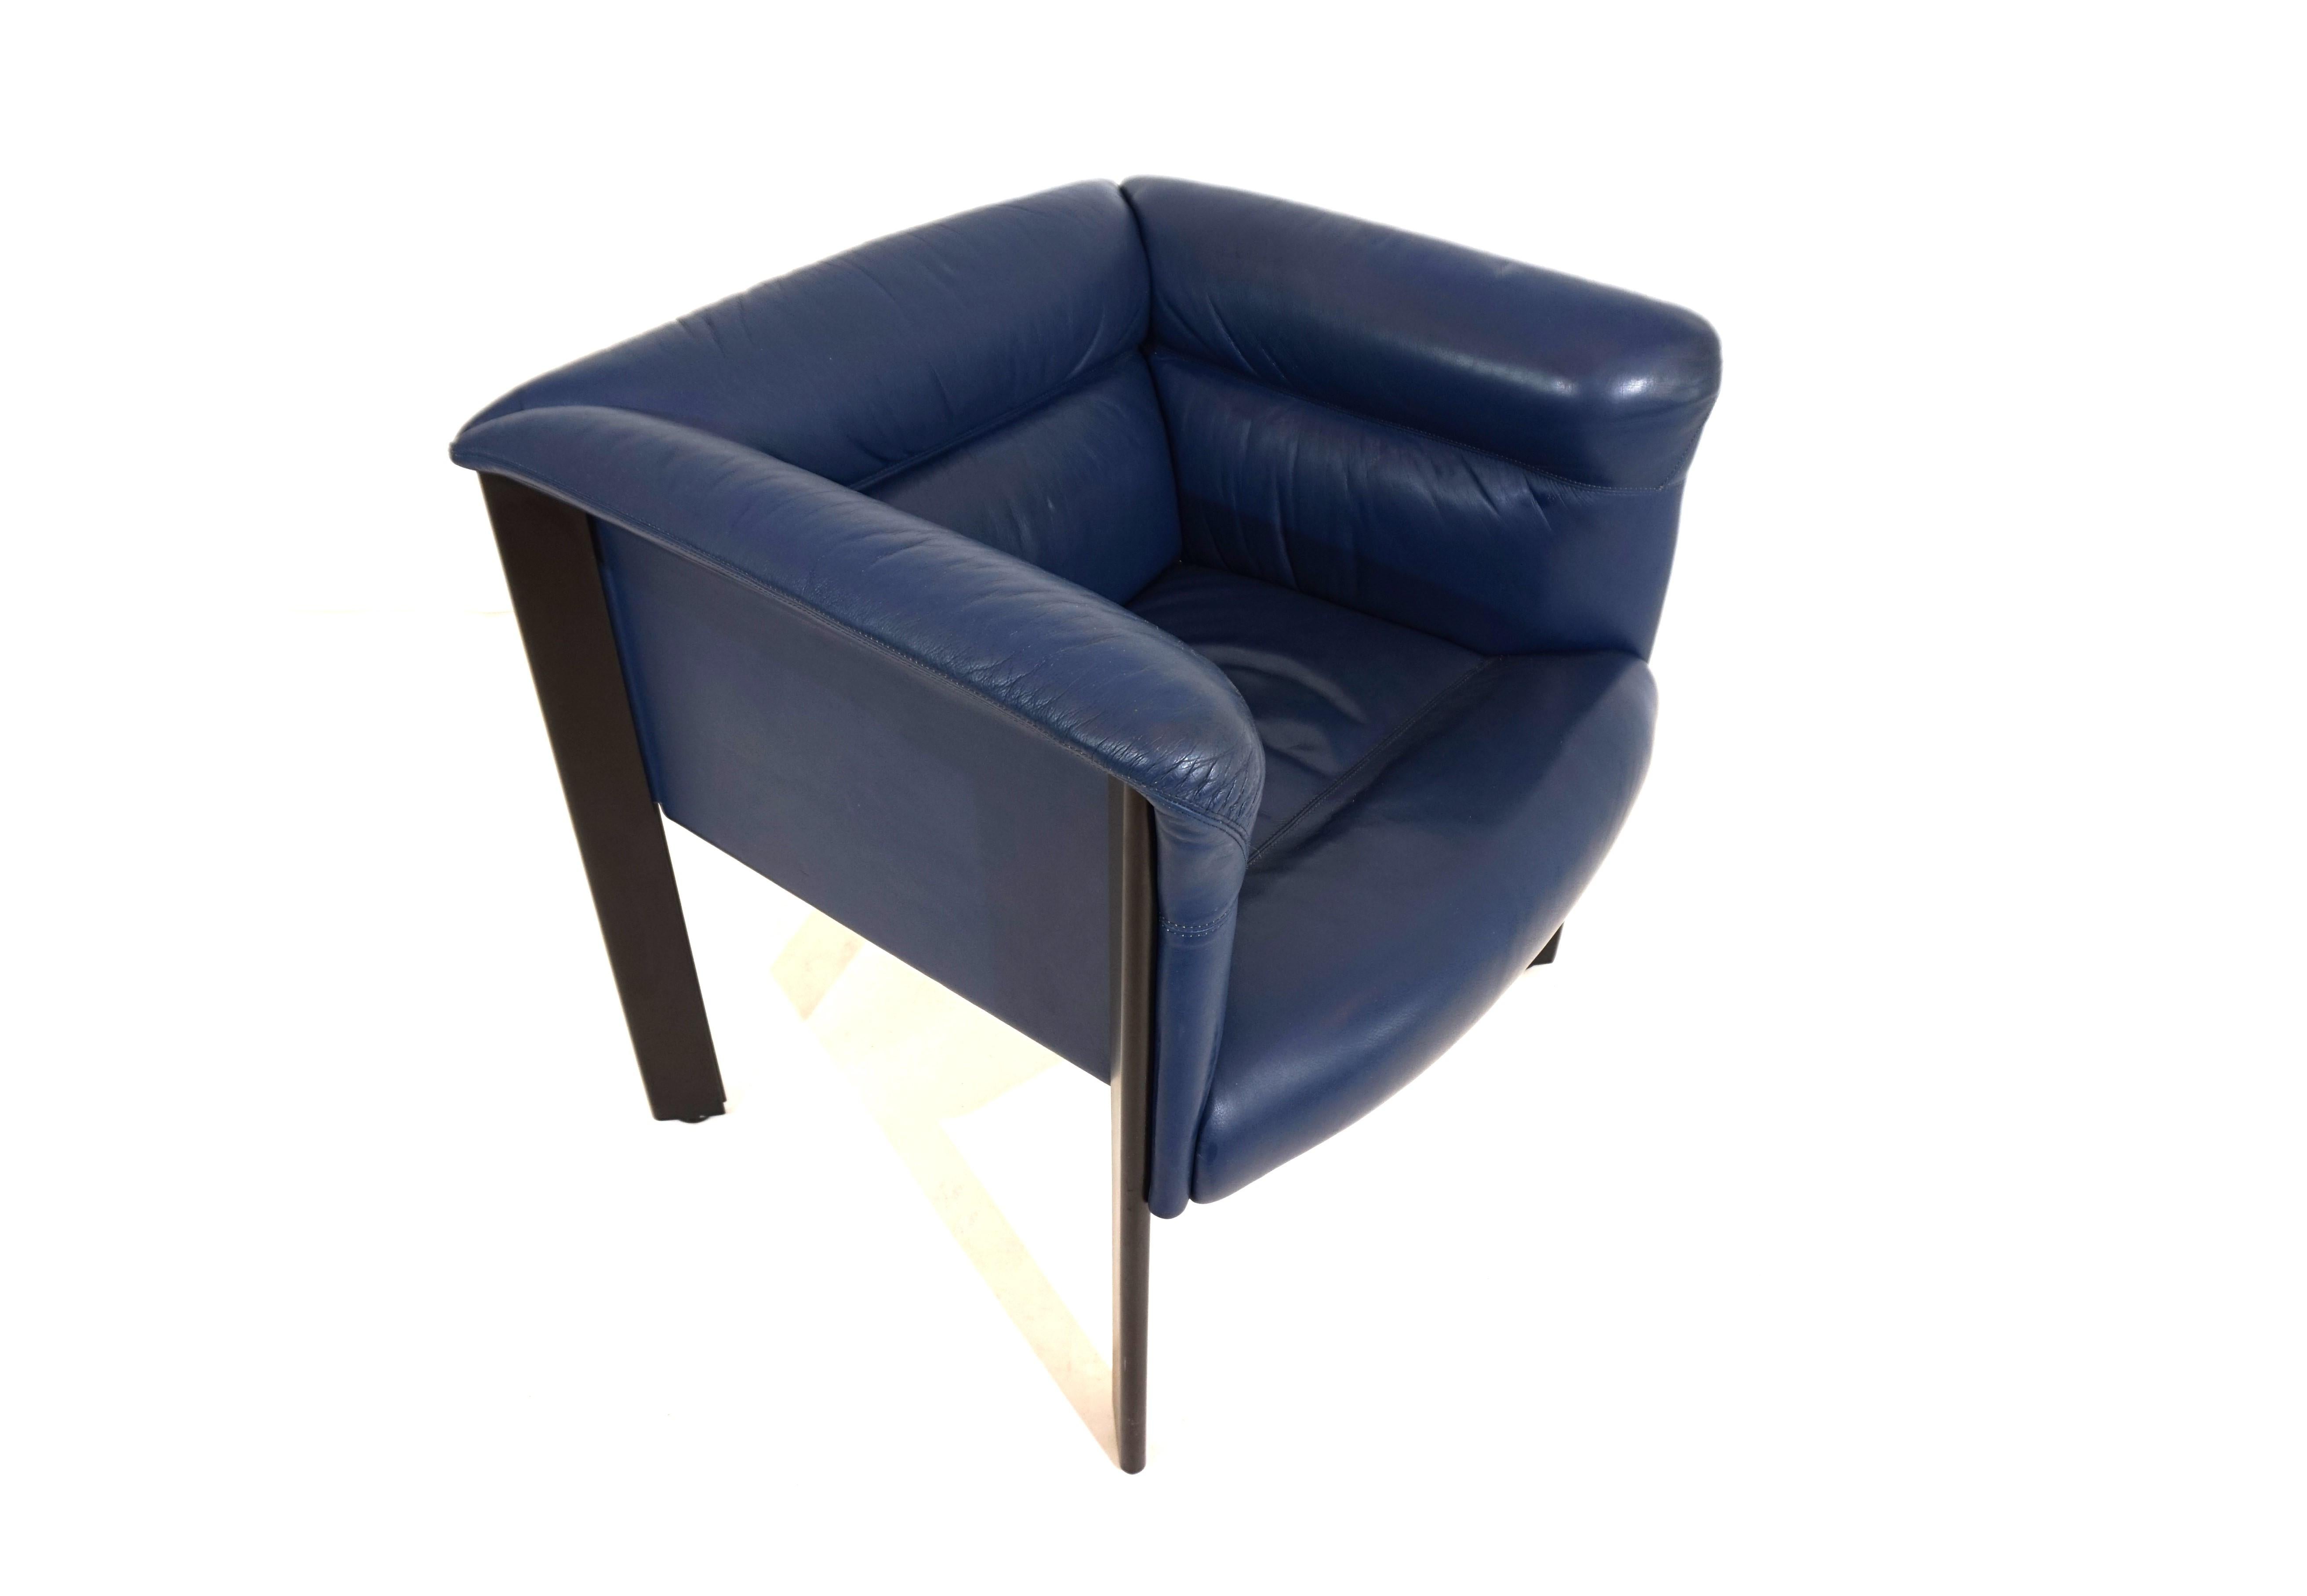 Poltrona Frau Interlude leather armchair by Marco Zanuso In Good Condition For Sale In Ludwigslust, DE